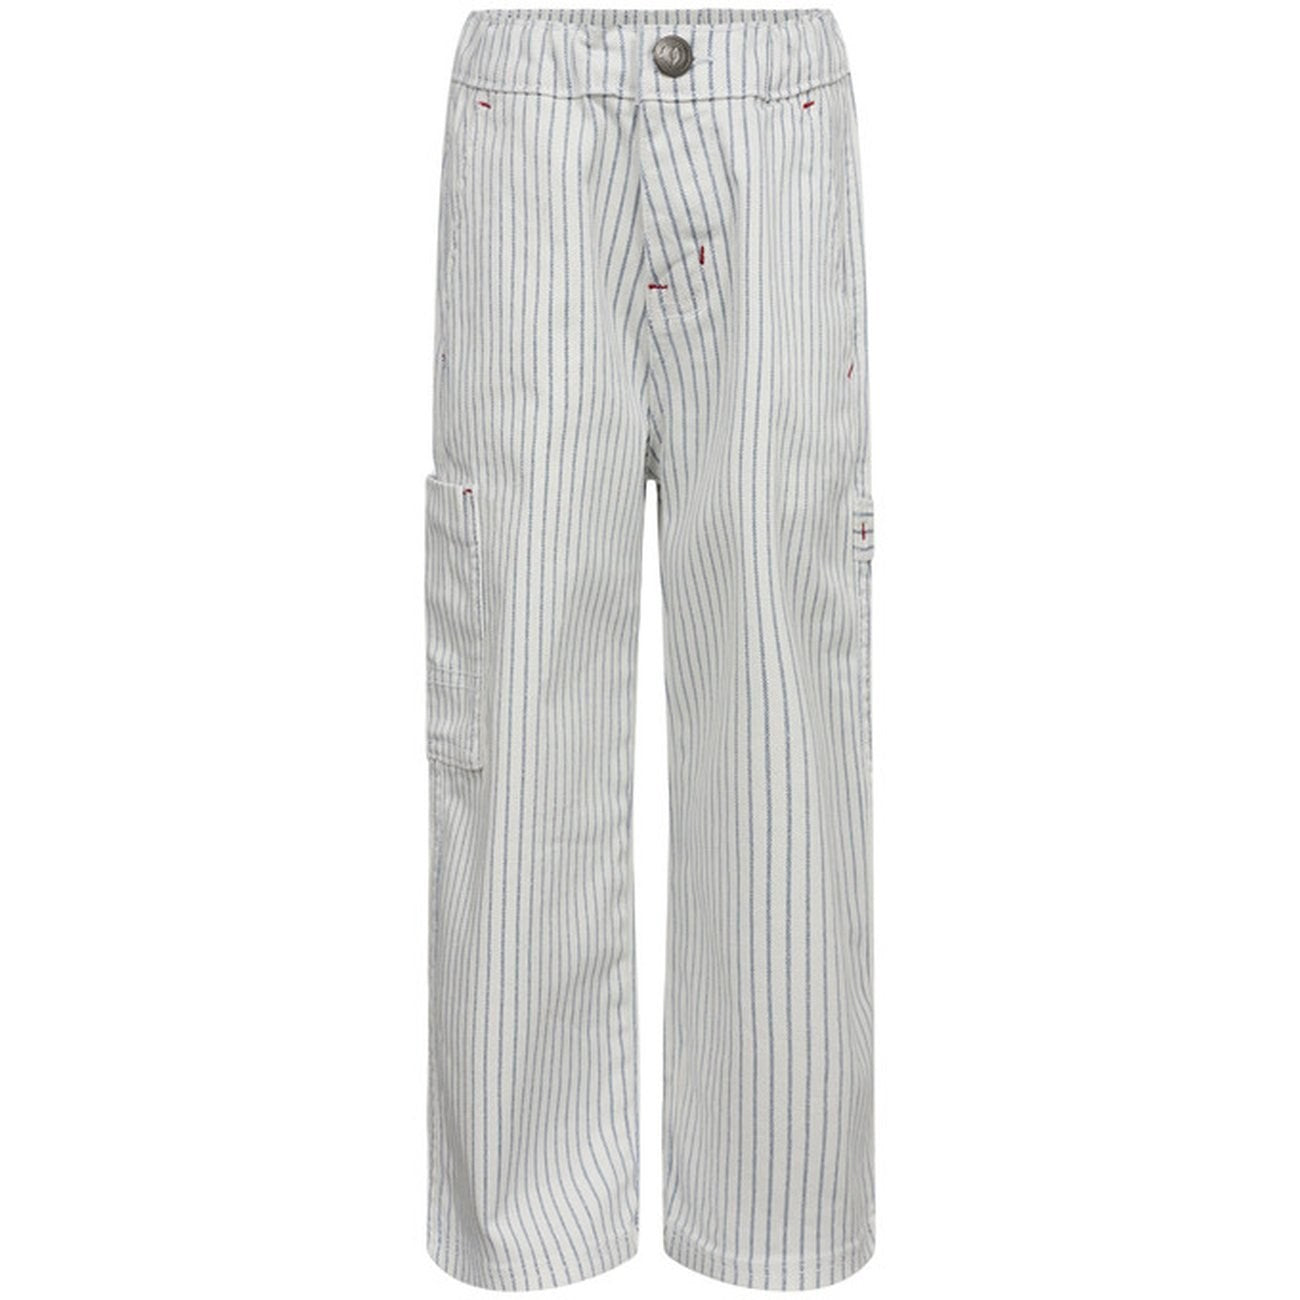 Sofie Schnoor Blue Striped Trousers